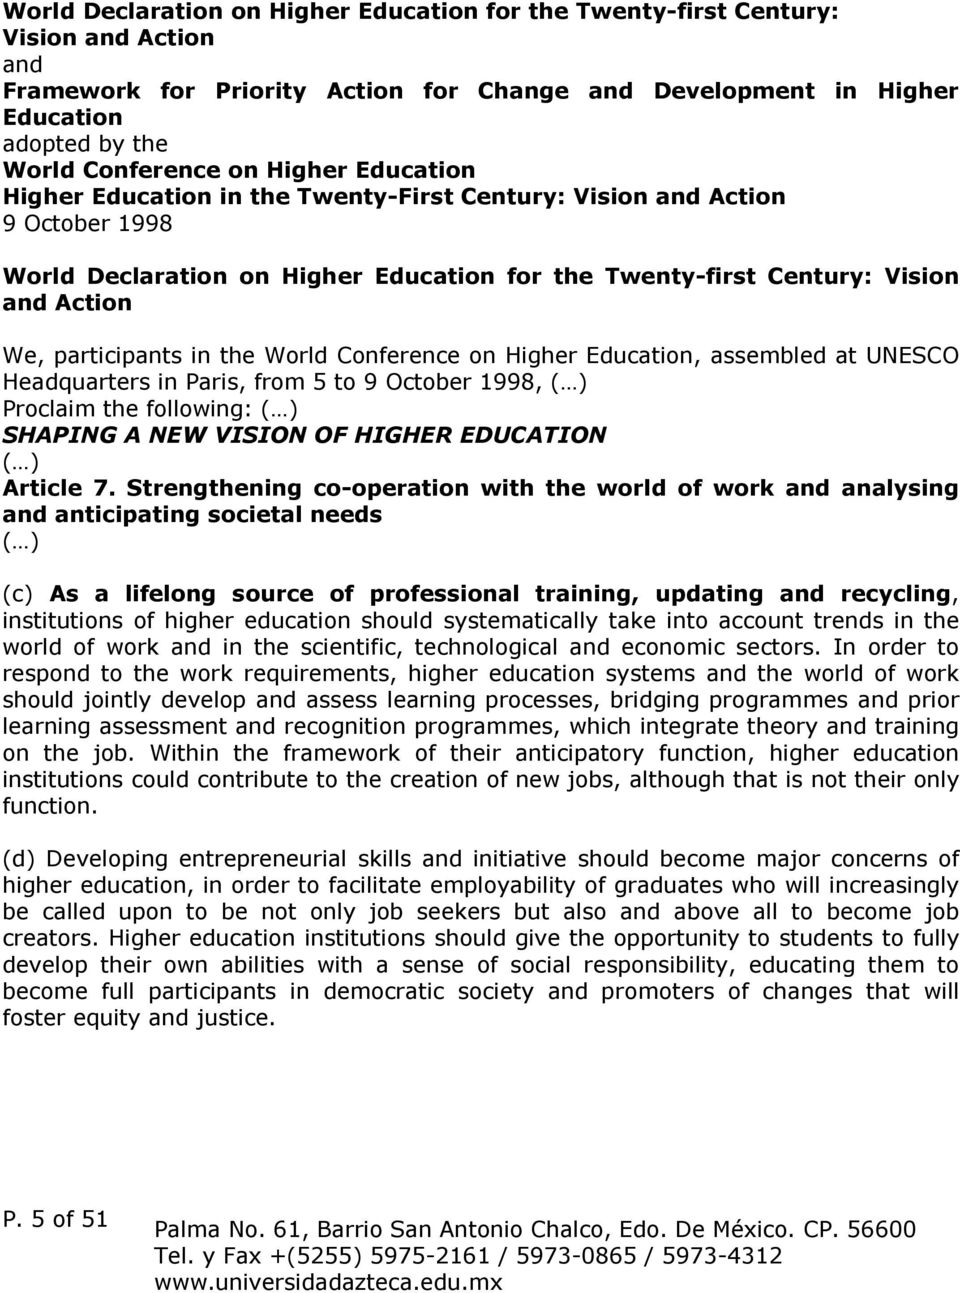 participants in the World Conference on Higher Education, assembled at UNESCO Headquarters in Paris, from 5 to 9 October 1998, ( ) Proclaim the following: ( ) SHAPING A NEW VISION OF HIGHER EDUCATION